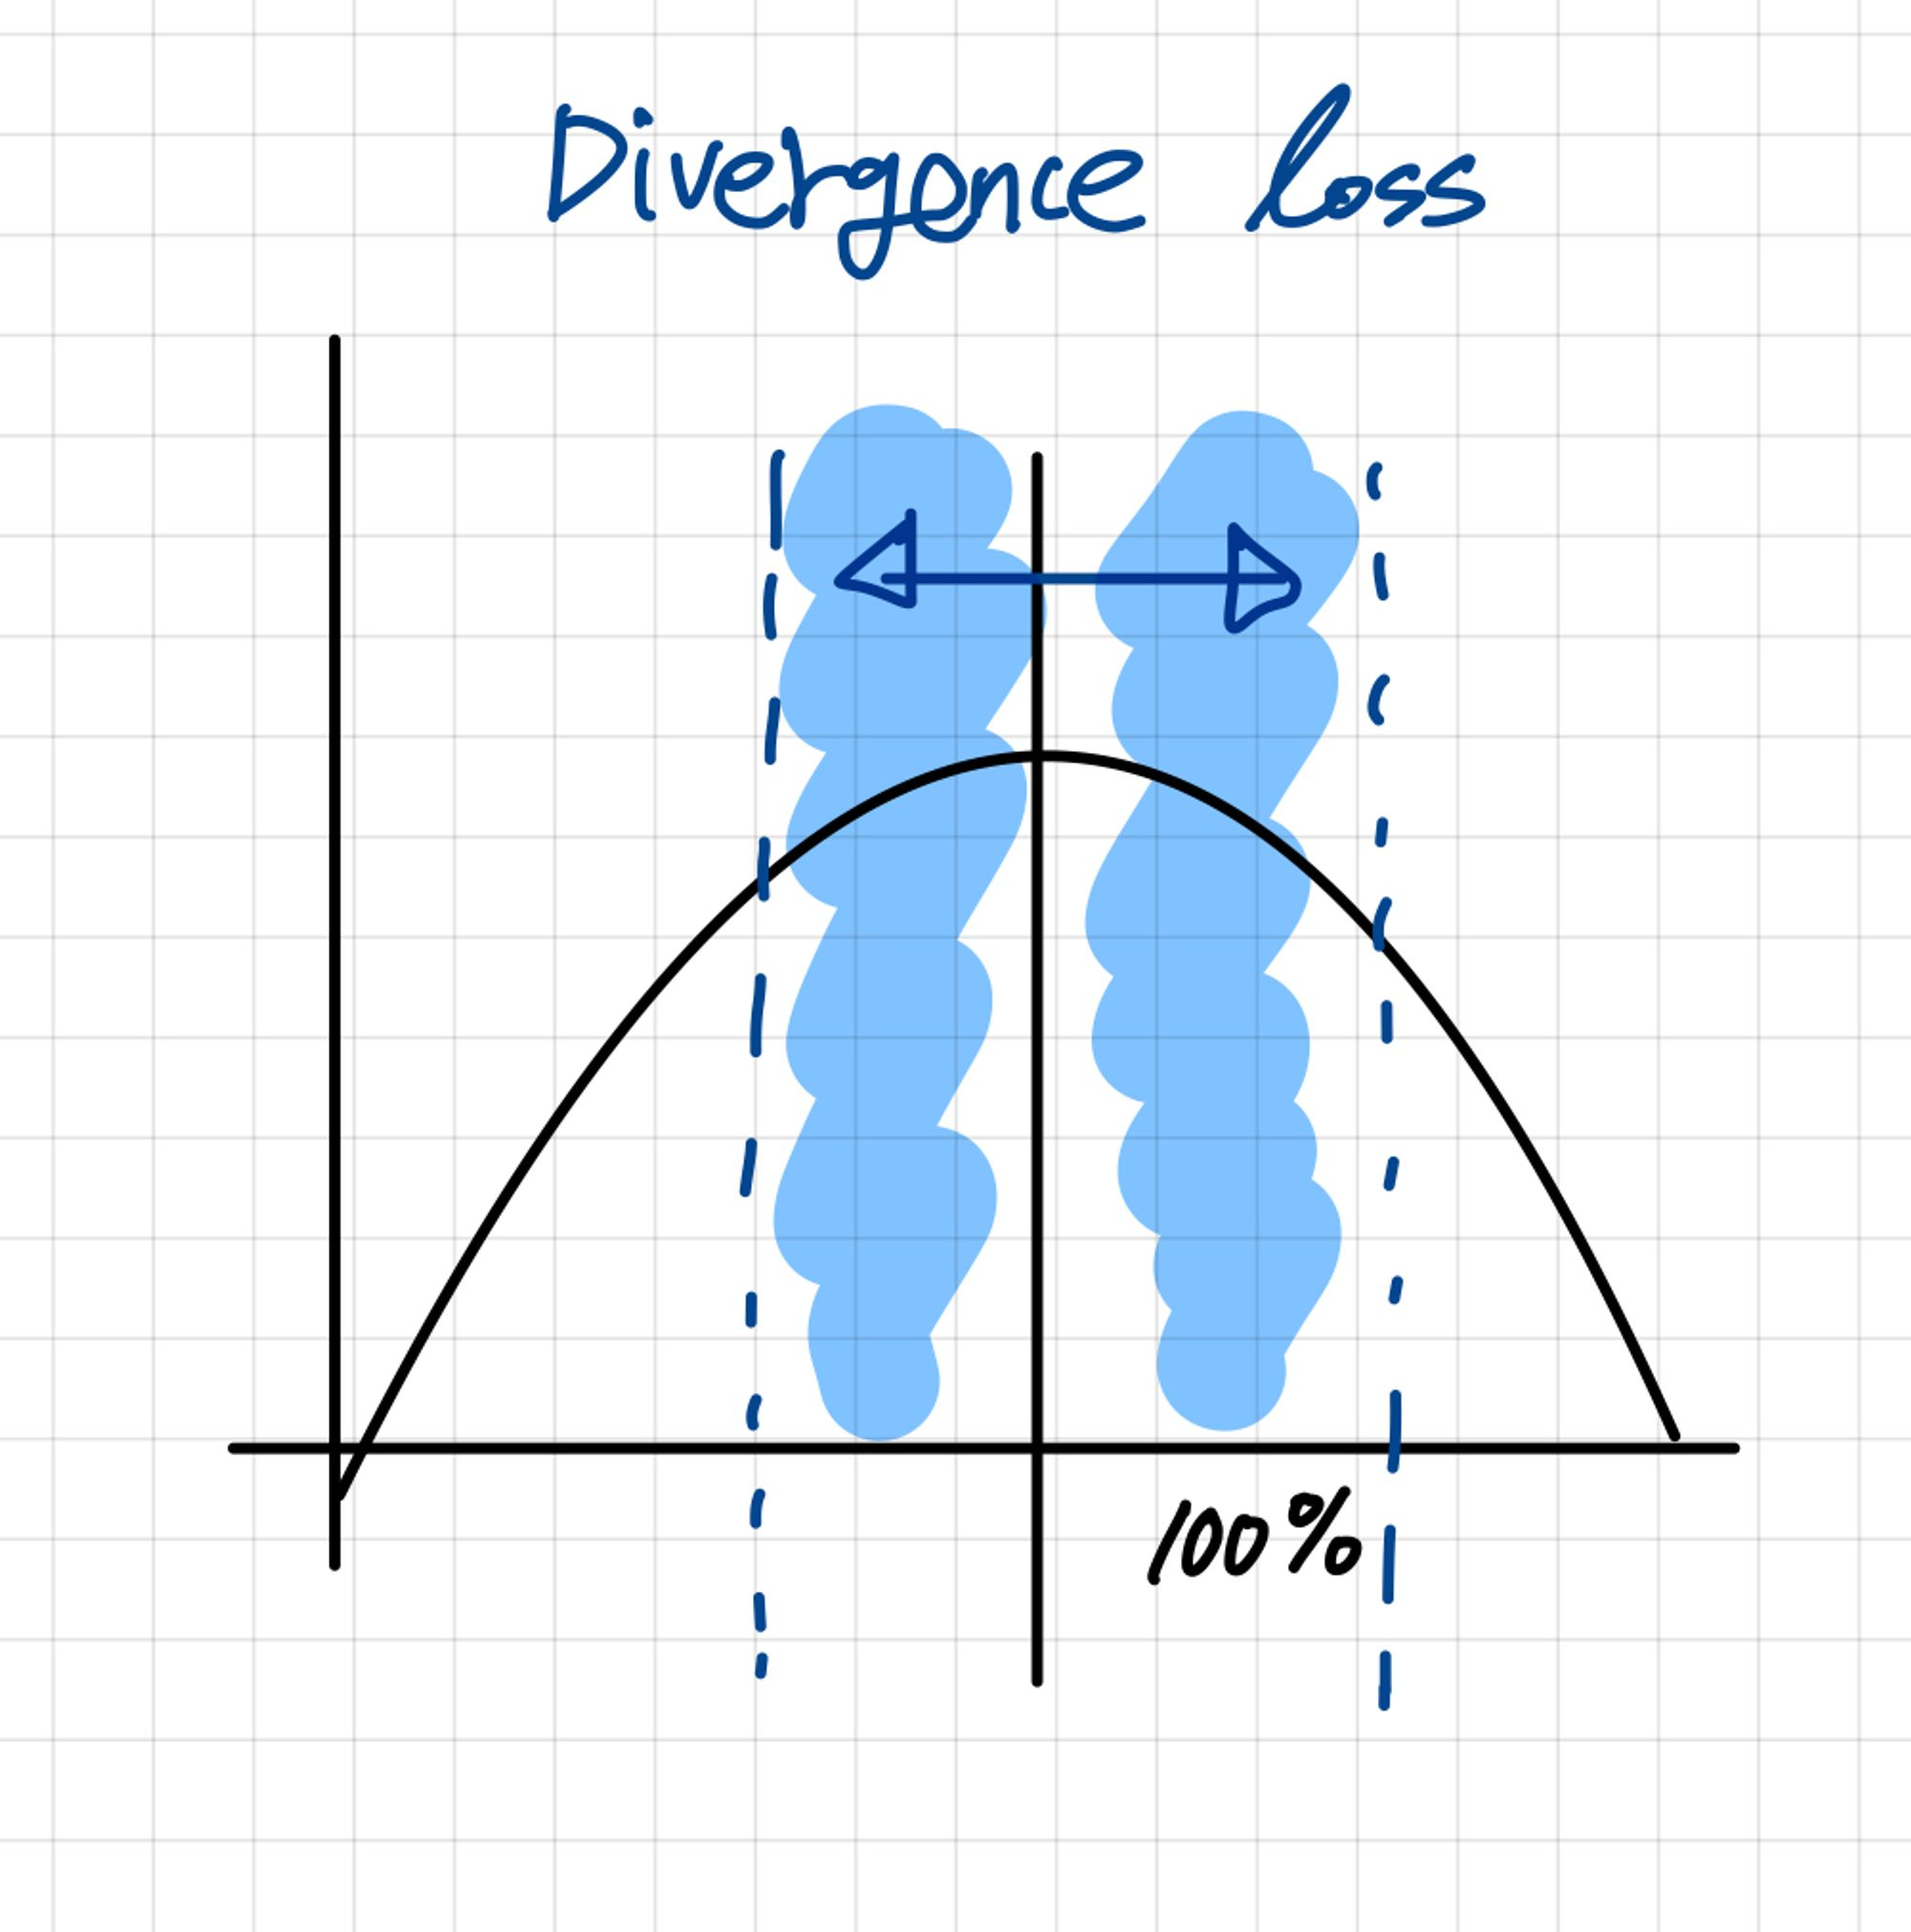 Divergence loss